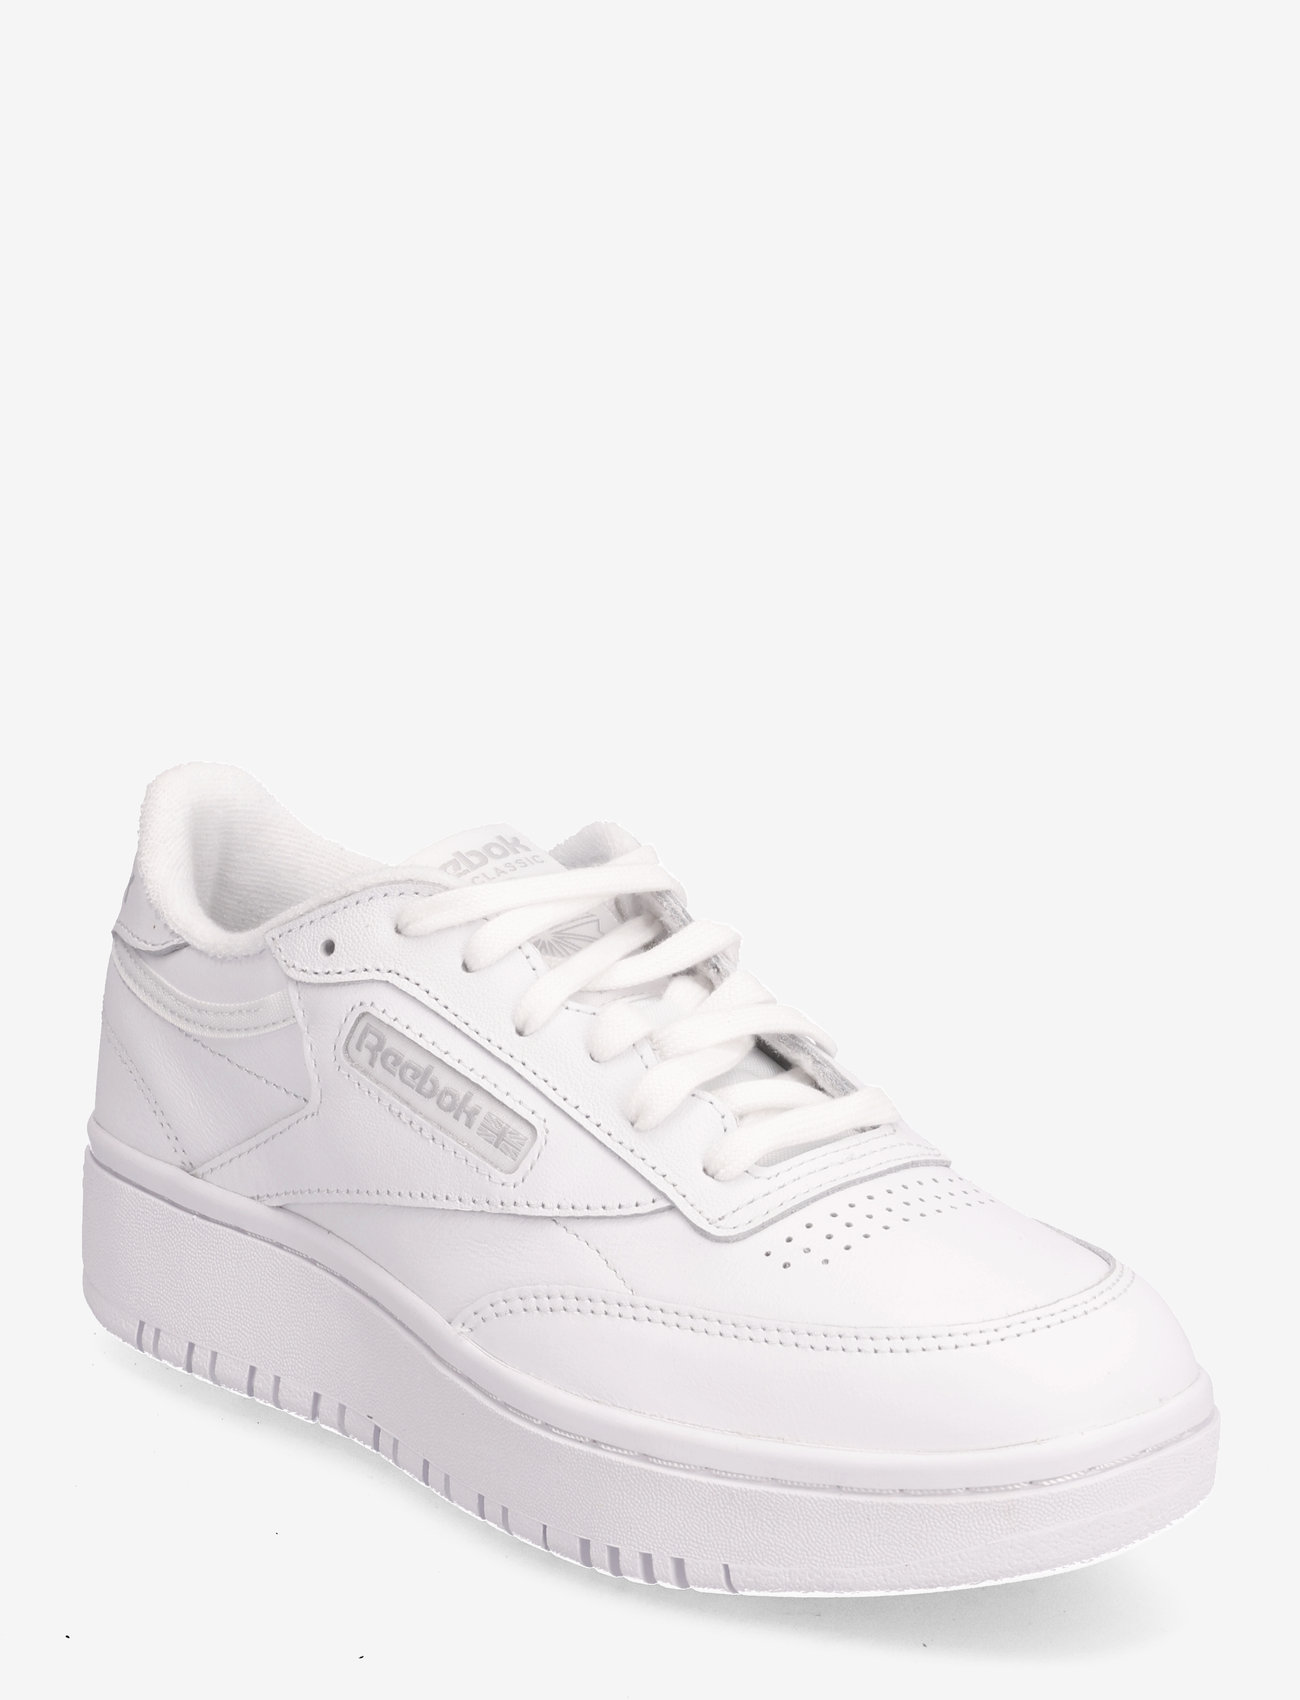 Reebok Classics - CLUB C DOUBLE - sneakers med lavt skaft - ftwwht/ftwwht/cdgry2 - 0